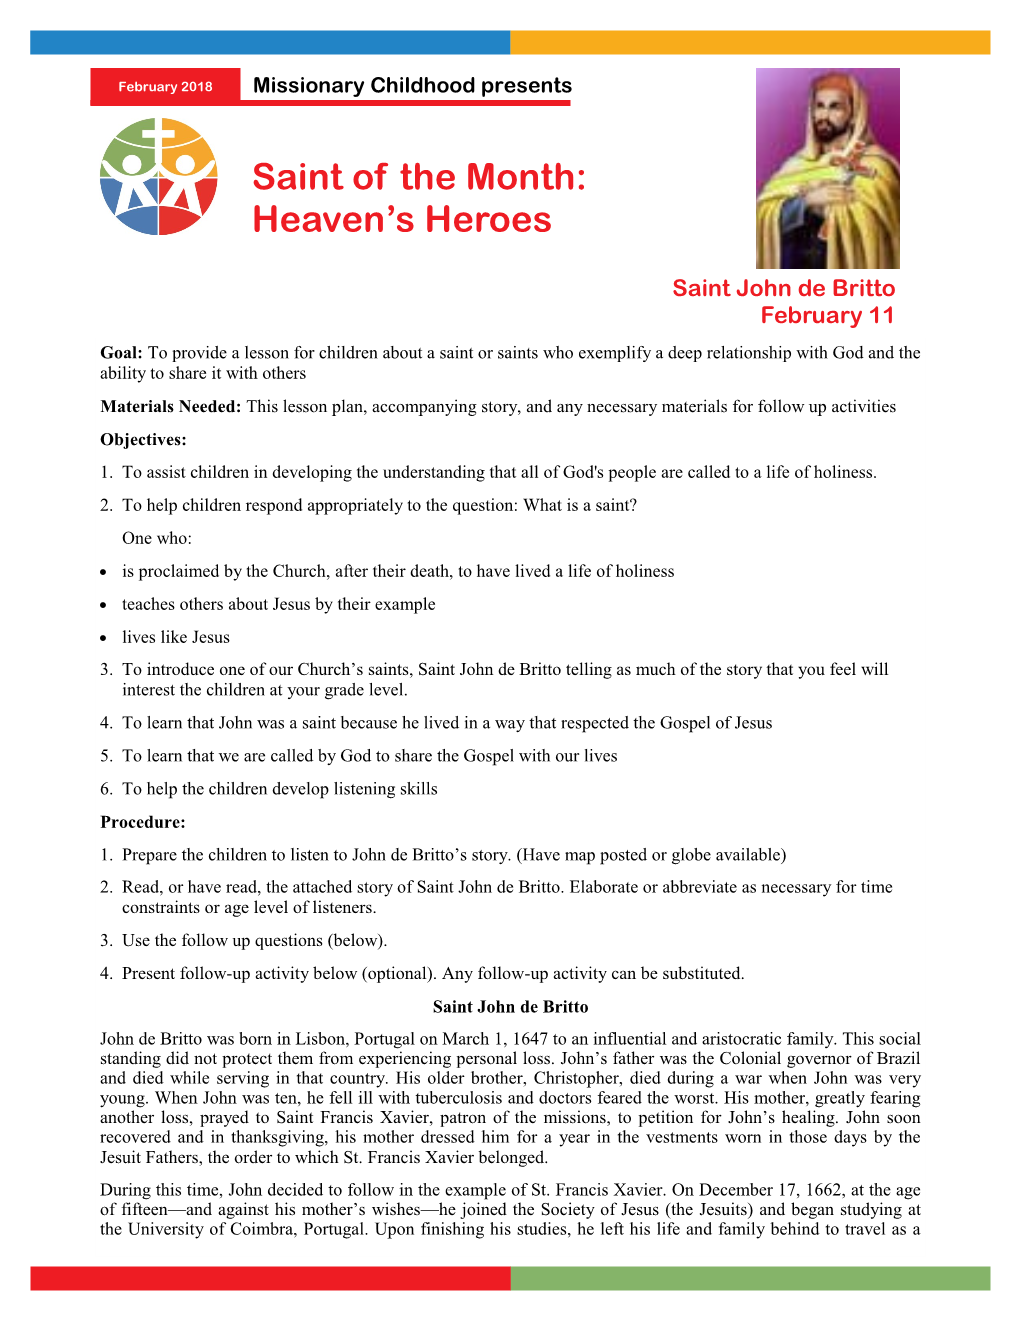 Saint of the Month: Heaven's Heroes